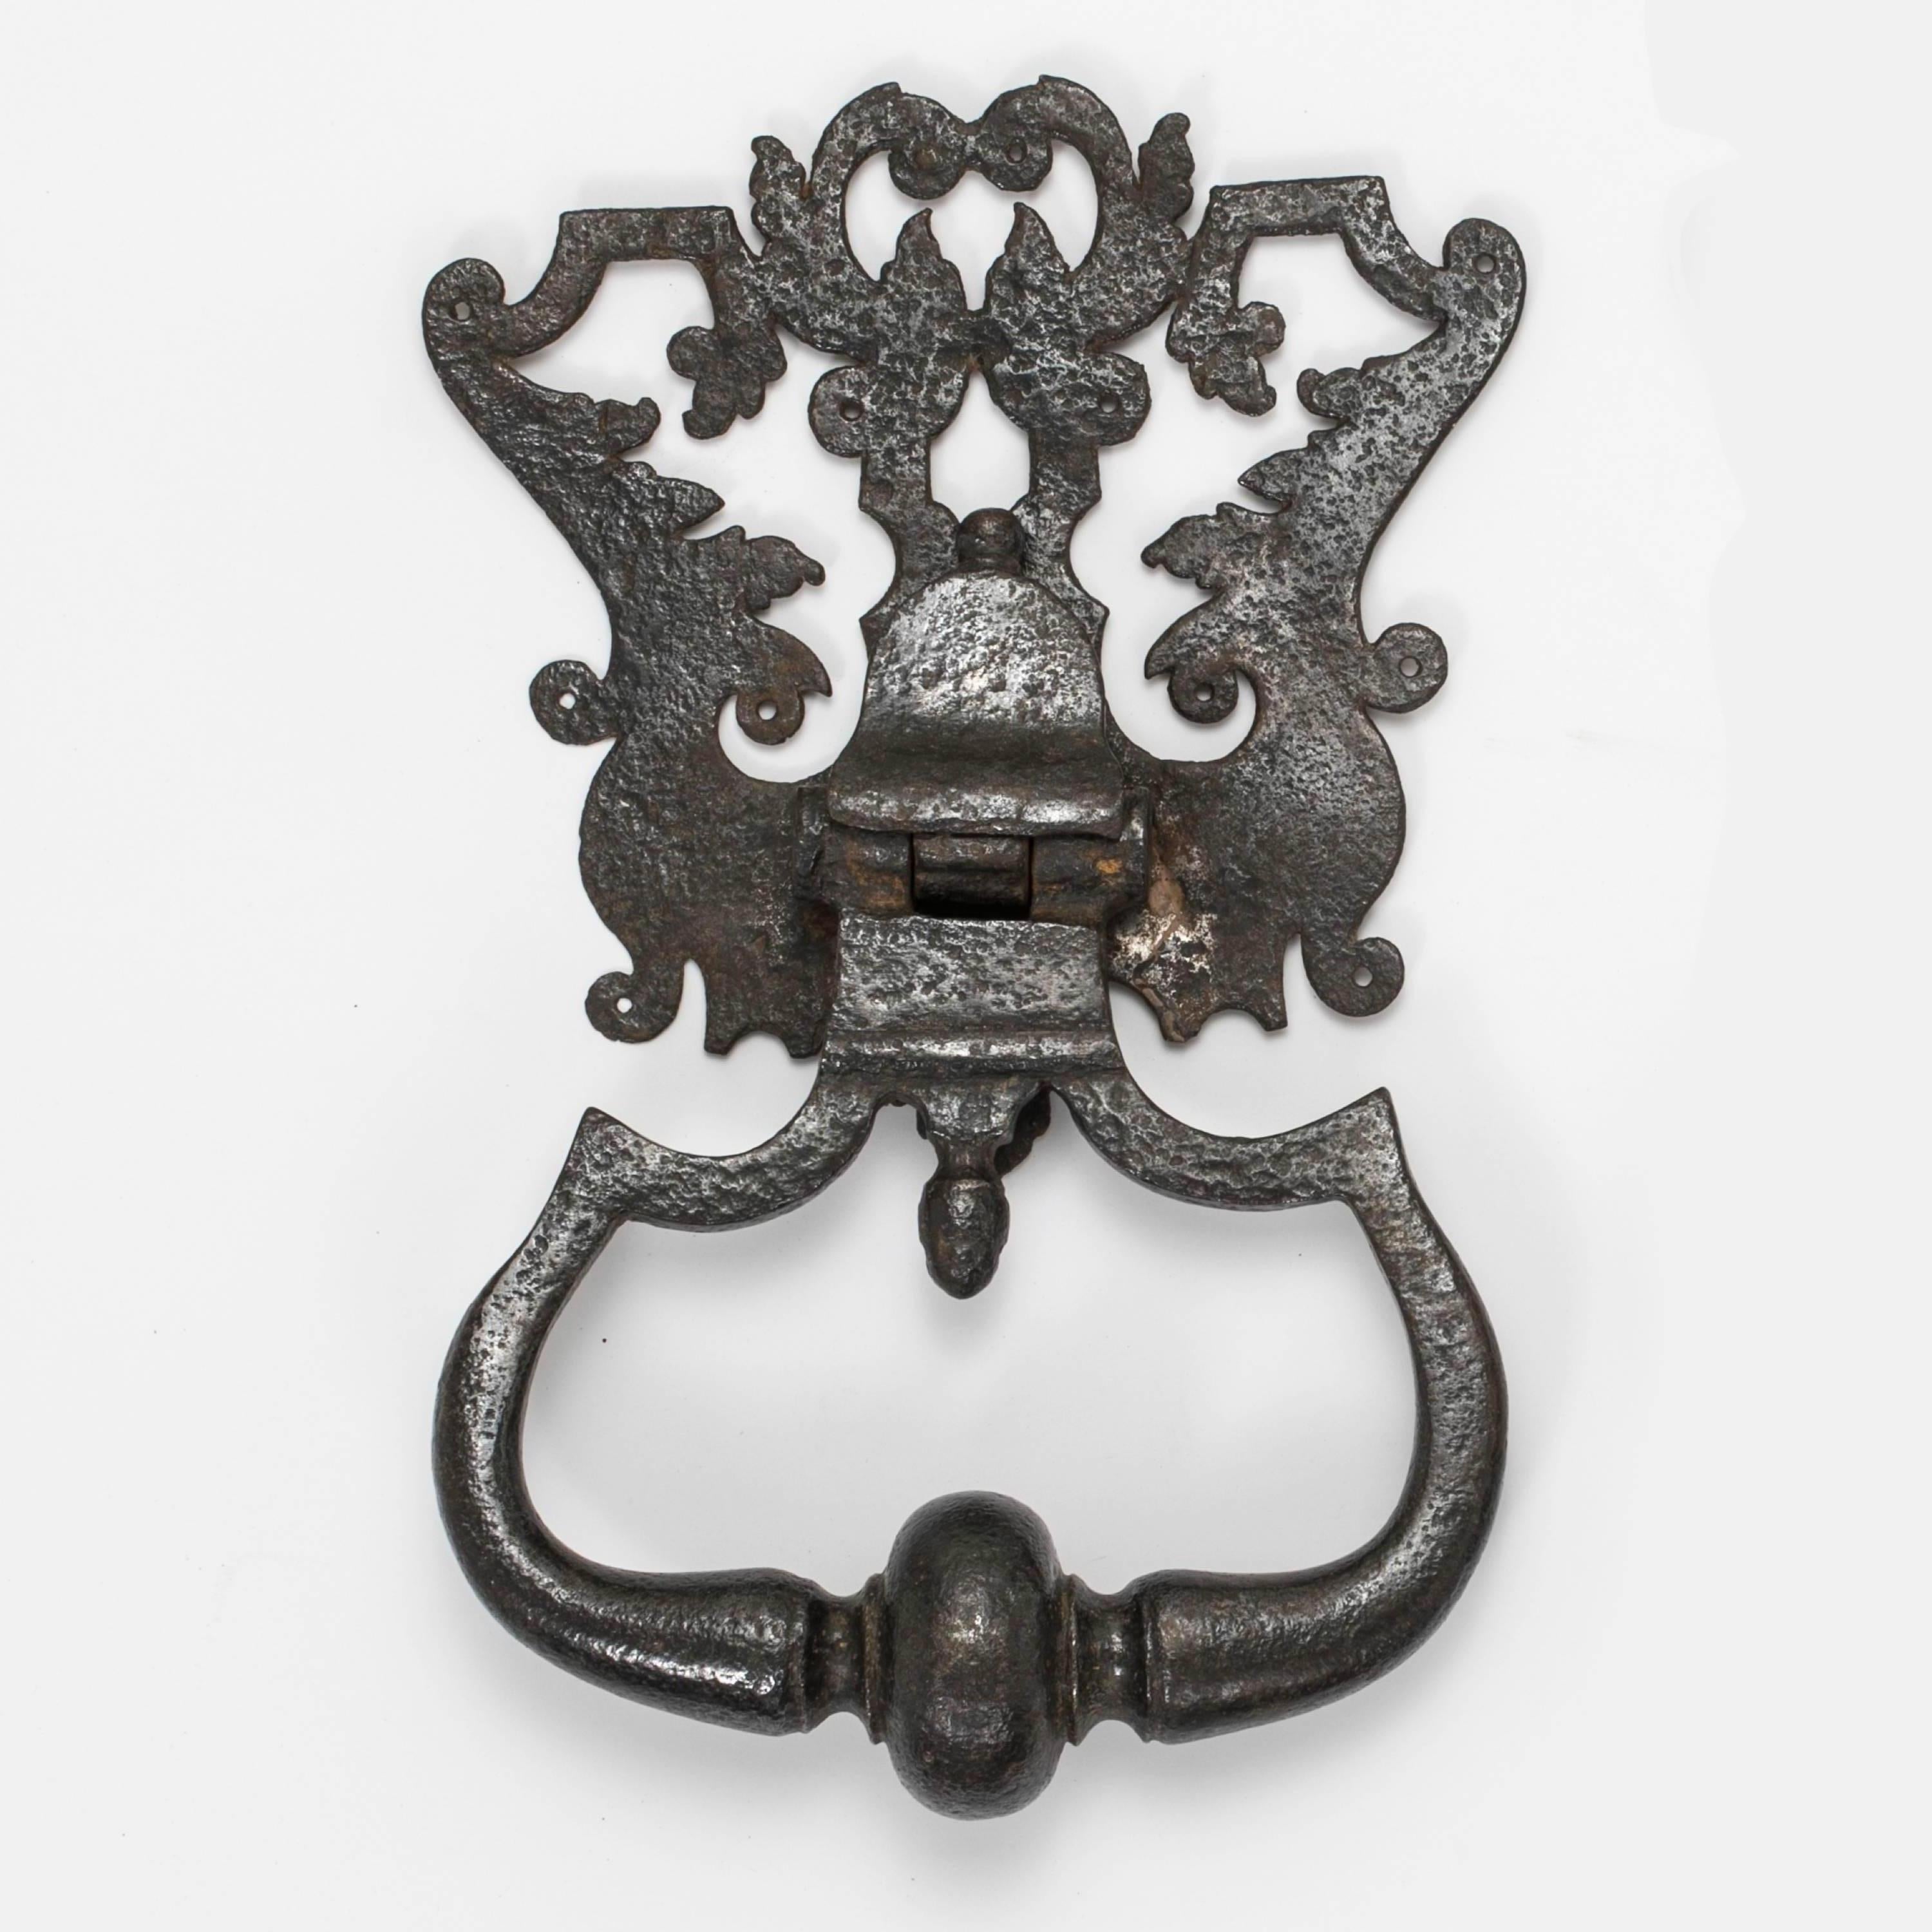 Large scaled, fantastic handmade iron door knocker. Upper part is cut design with hinged solid iron knocker.
Probably belonged on a huge ancient Italian door.
Rustic aged over the years, great looking!
 